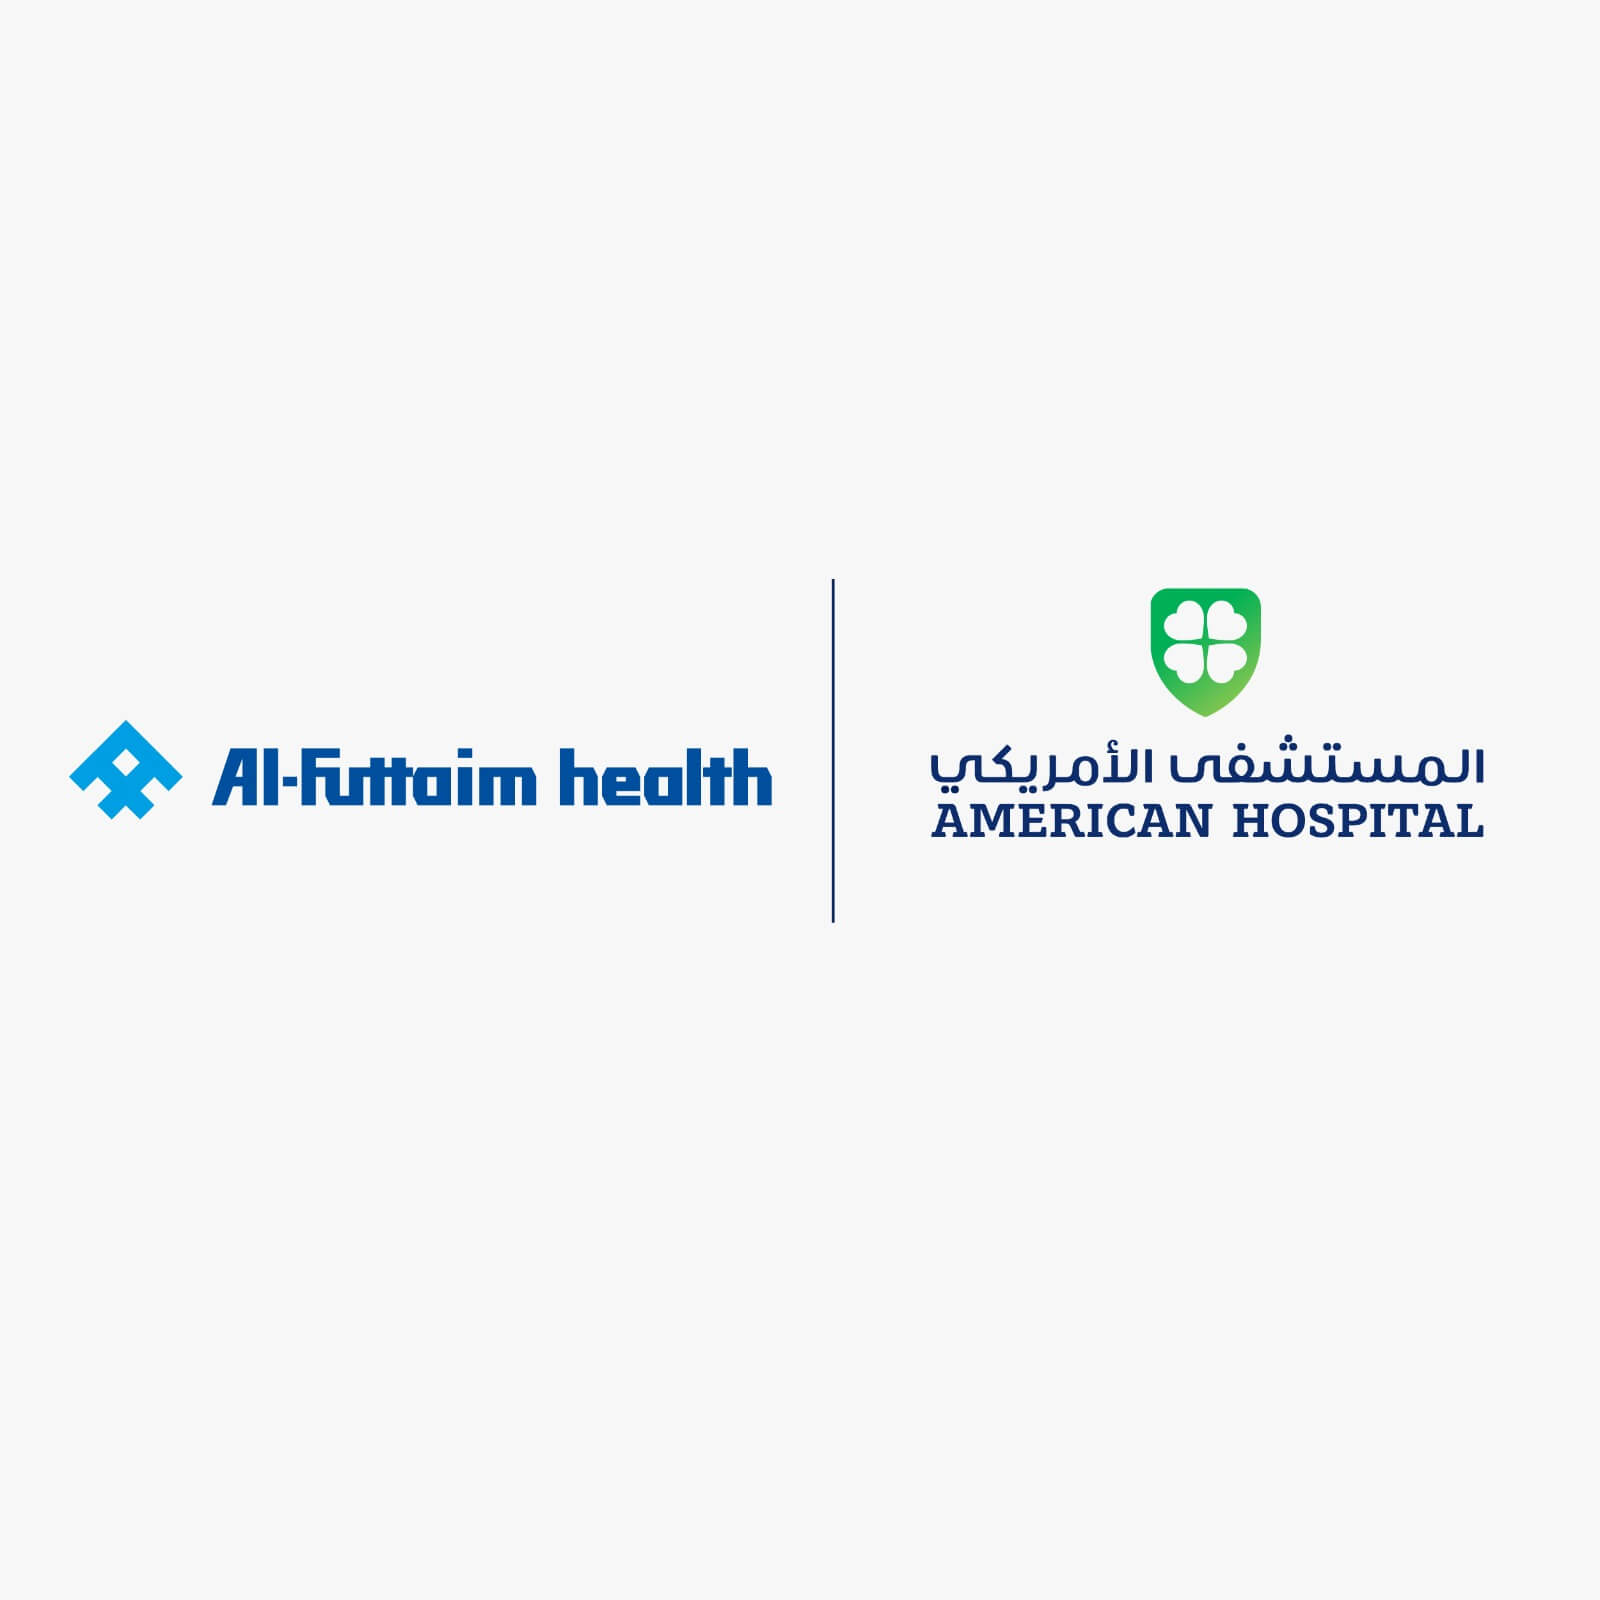 American Hospital Dubai and Al-Futtaim Health in final stages of partnership agreement for management of Al-Futtaim Health's aesthetic clinic